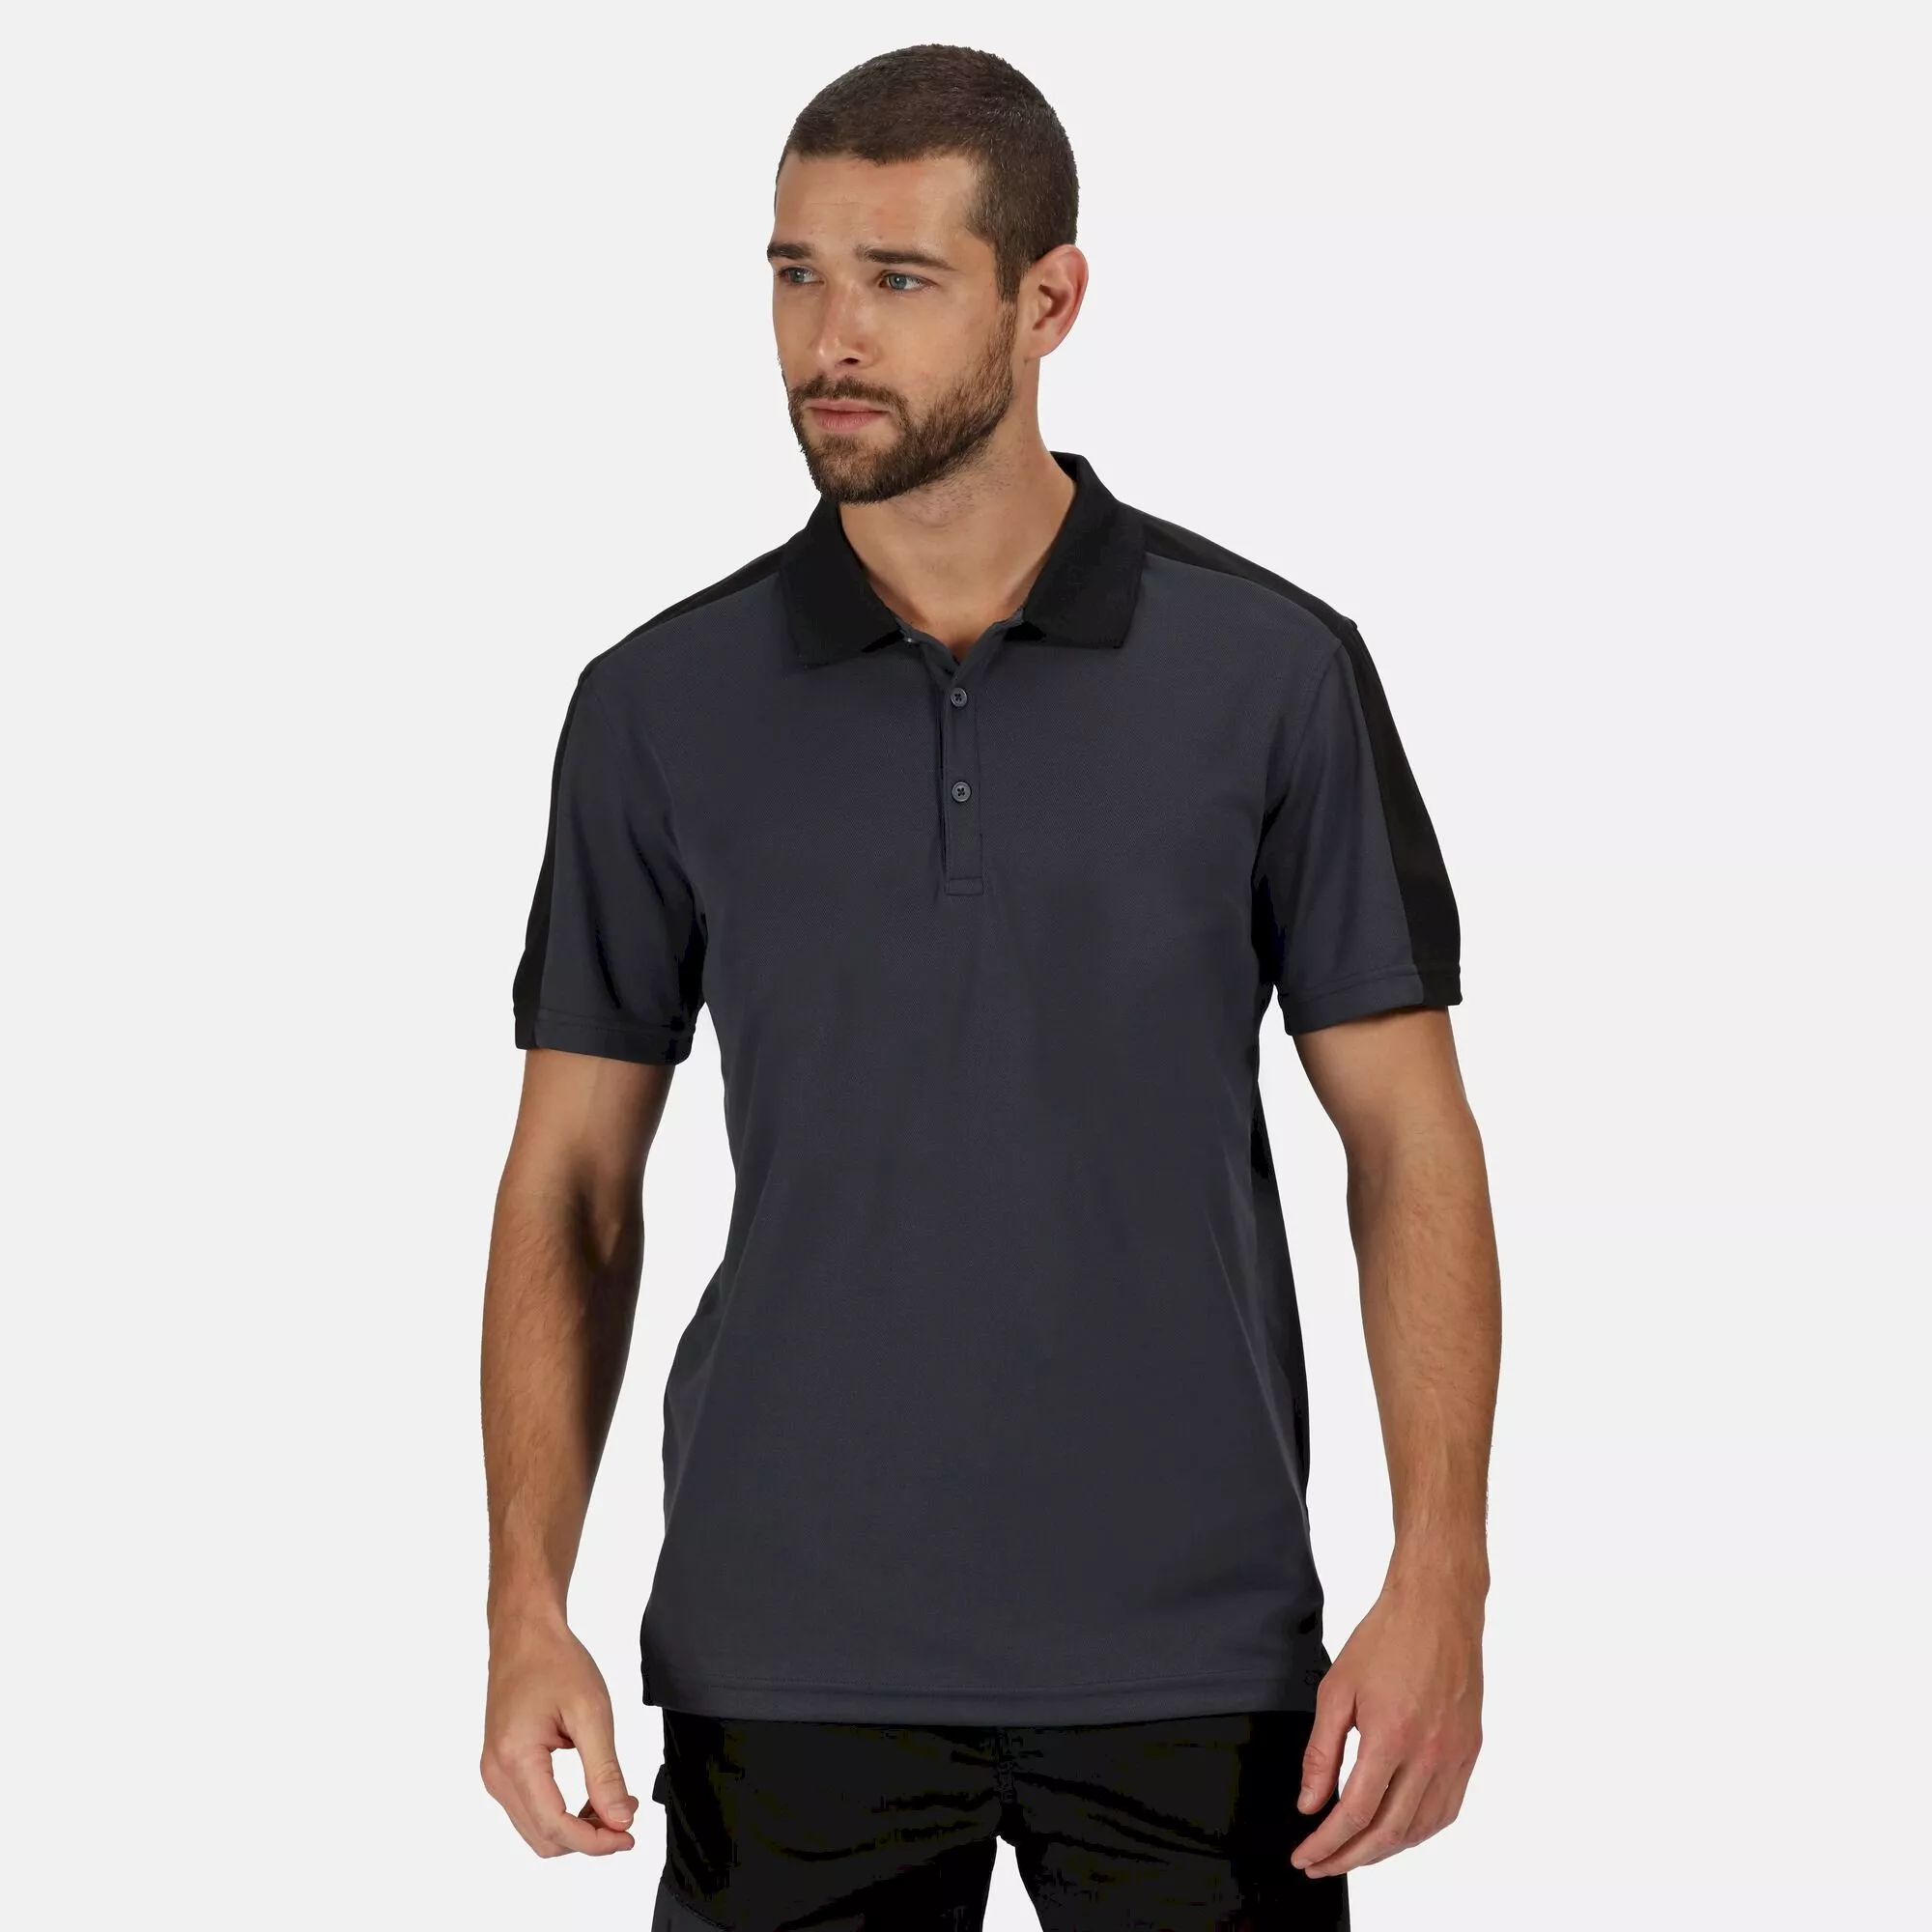 Men's Contrast Coolweave Quick Wicking Polo Shirt - Seal Grey Black